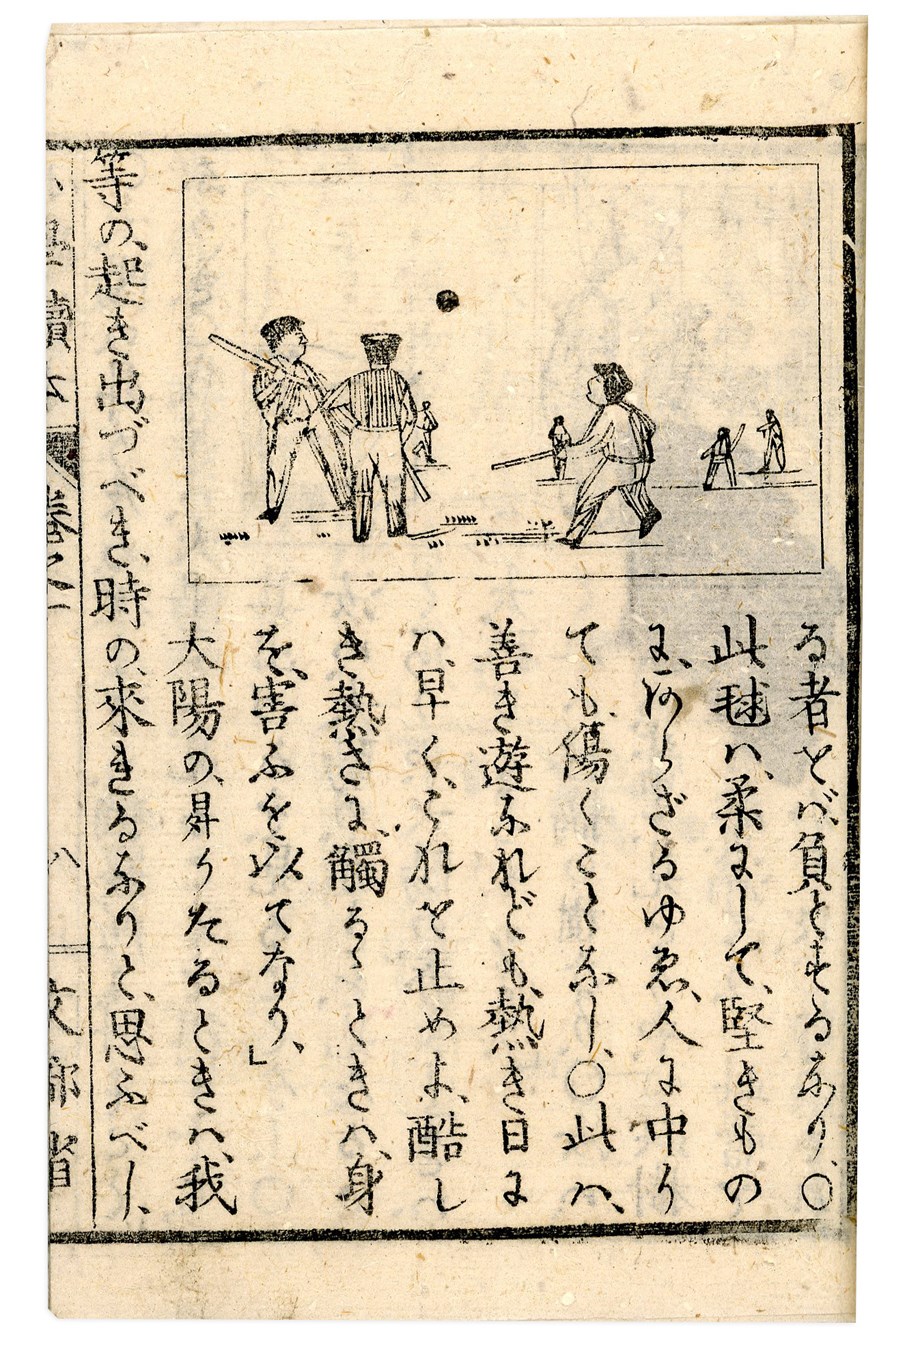 - The Earliest Known Japanese Baseball Piece - 1887 Woodblock